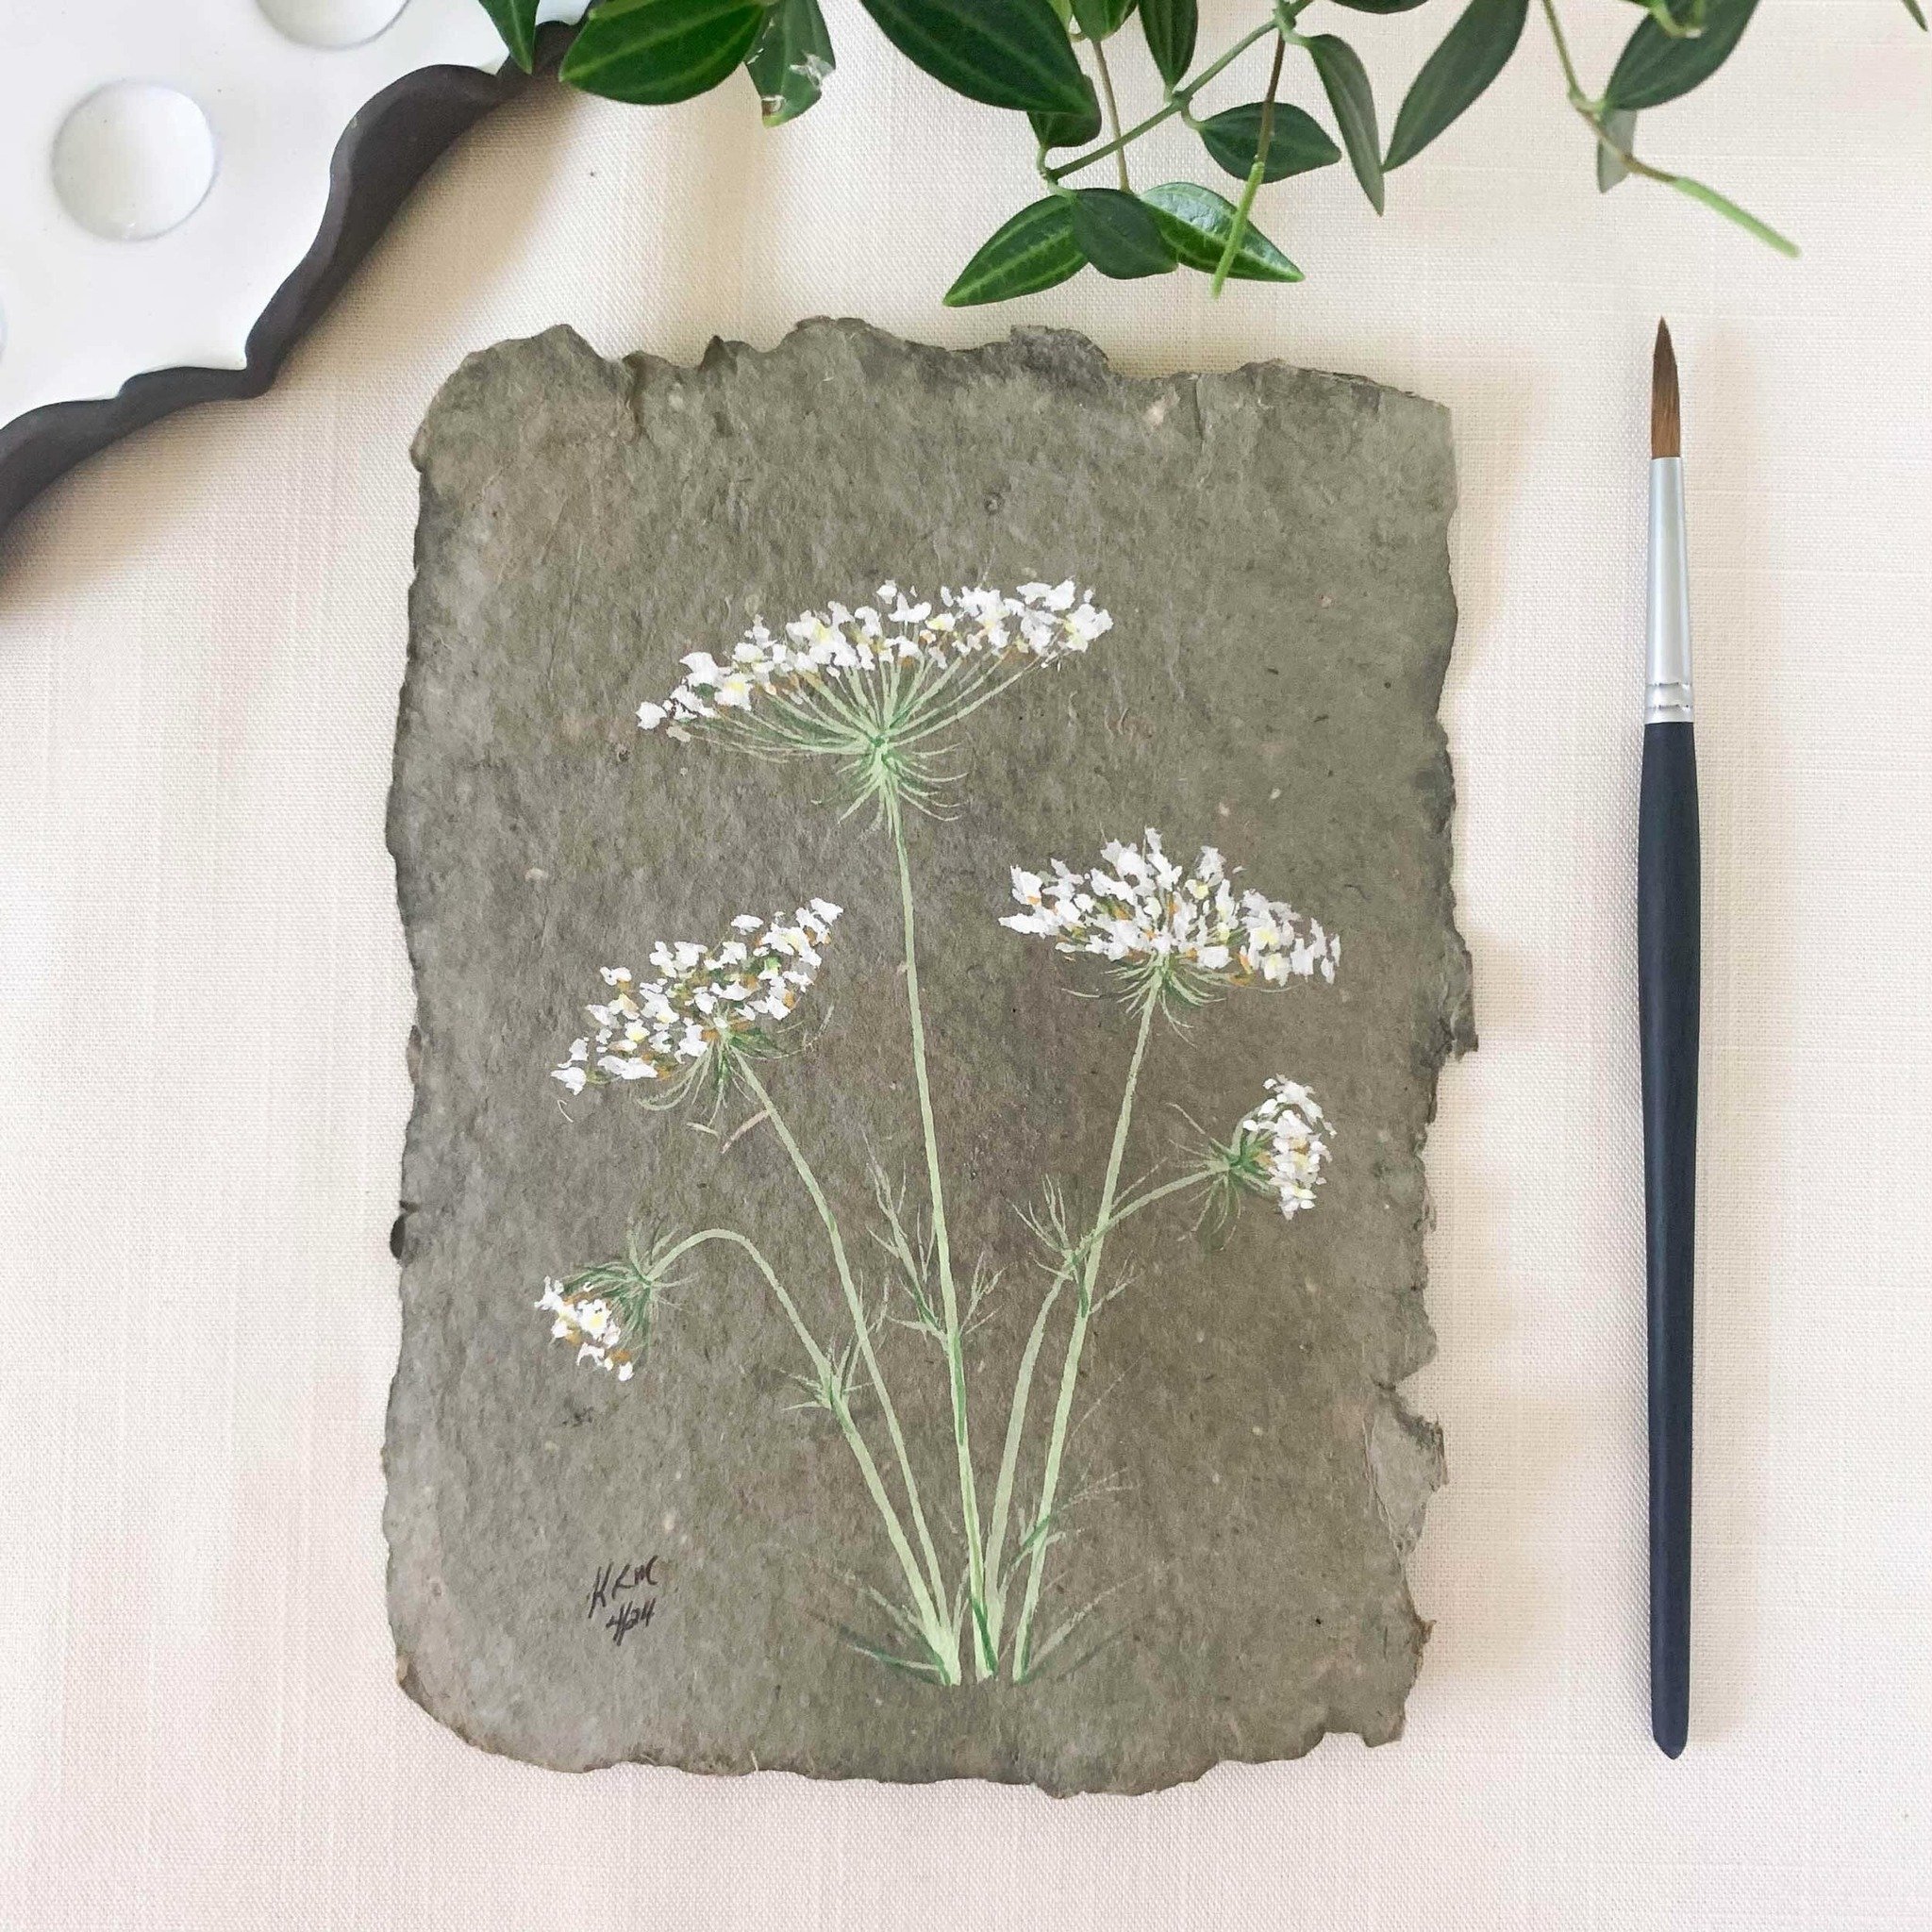 A larger Queen Anne Lace on a mountain green handmade paper. Painted in gouache.
#queenanneslace #gouachepainting #wildflowers #wildflowerart #whiteflowers #inspiredbyflowers #handmadepaper #flowerart #artist #painting #botanicalart #willowglenstatio